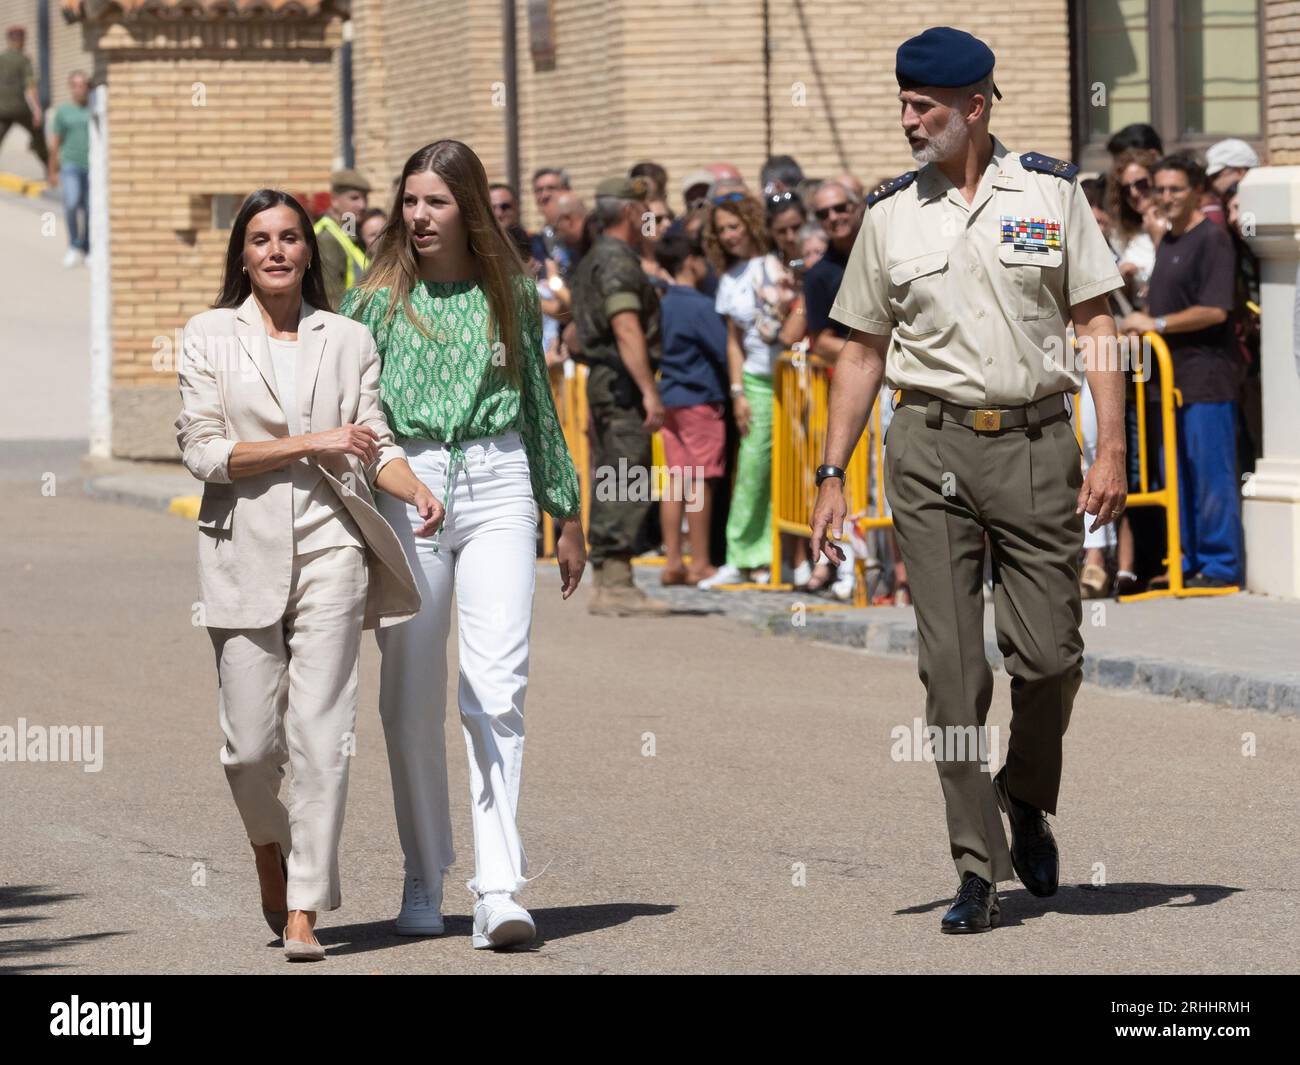 Zaragoza. Spain. 17th August, 2023. Today, the Princess of Asturias, Leonor de Borbón, has joined the Military Academy of Zaragoza to pursue her military studies. She has been accompanied by her parents, the kings of Spain, Felipe de Borbón and Letizia Ortiz, as well as her sister, the Infanta Sofía de Borbón. The princess will spend a year in this academy just like her father and grandfather did. Juan Antonio Perez/Alamy Live News Stock Photo